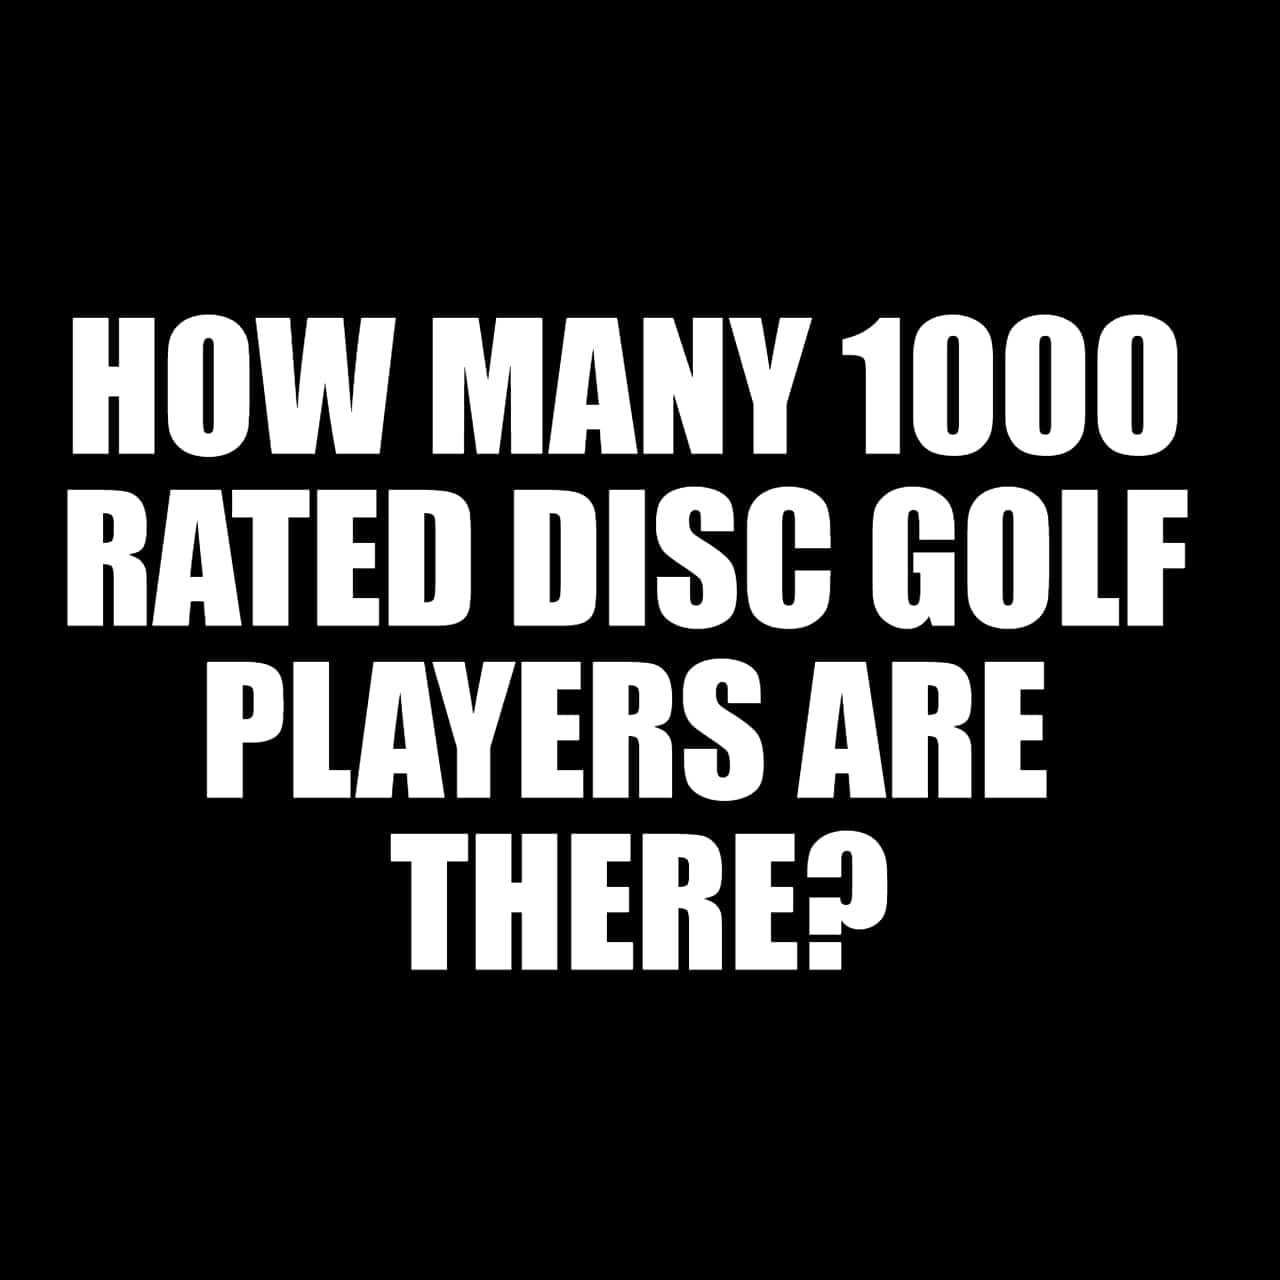 HOW Many 1000 Rated Disc Golf Players Are There?